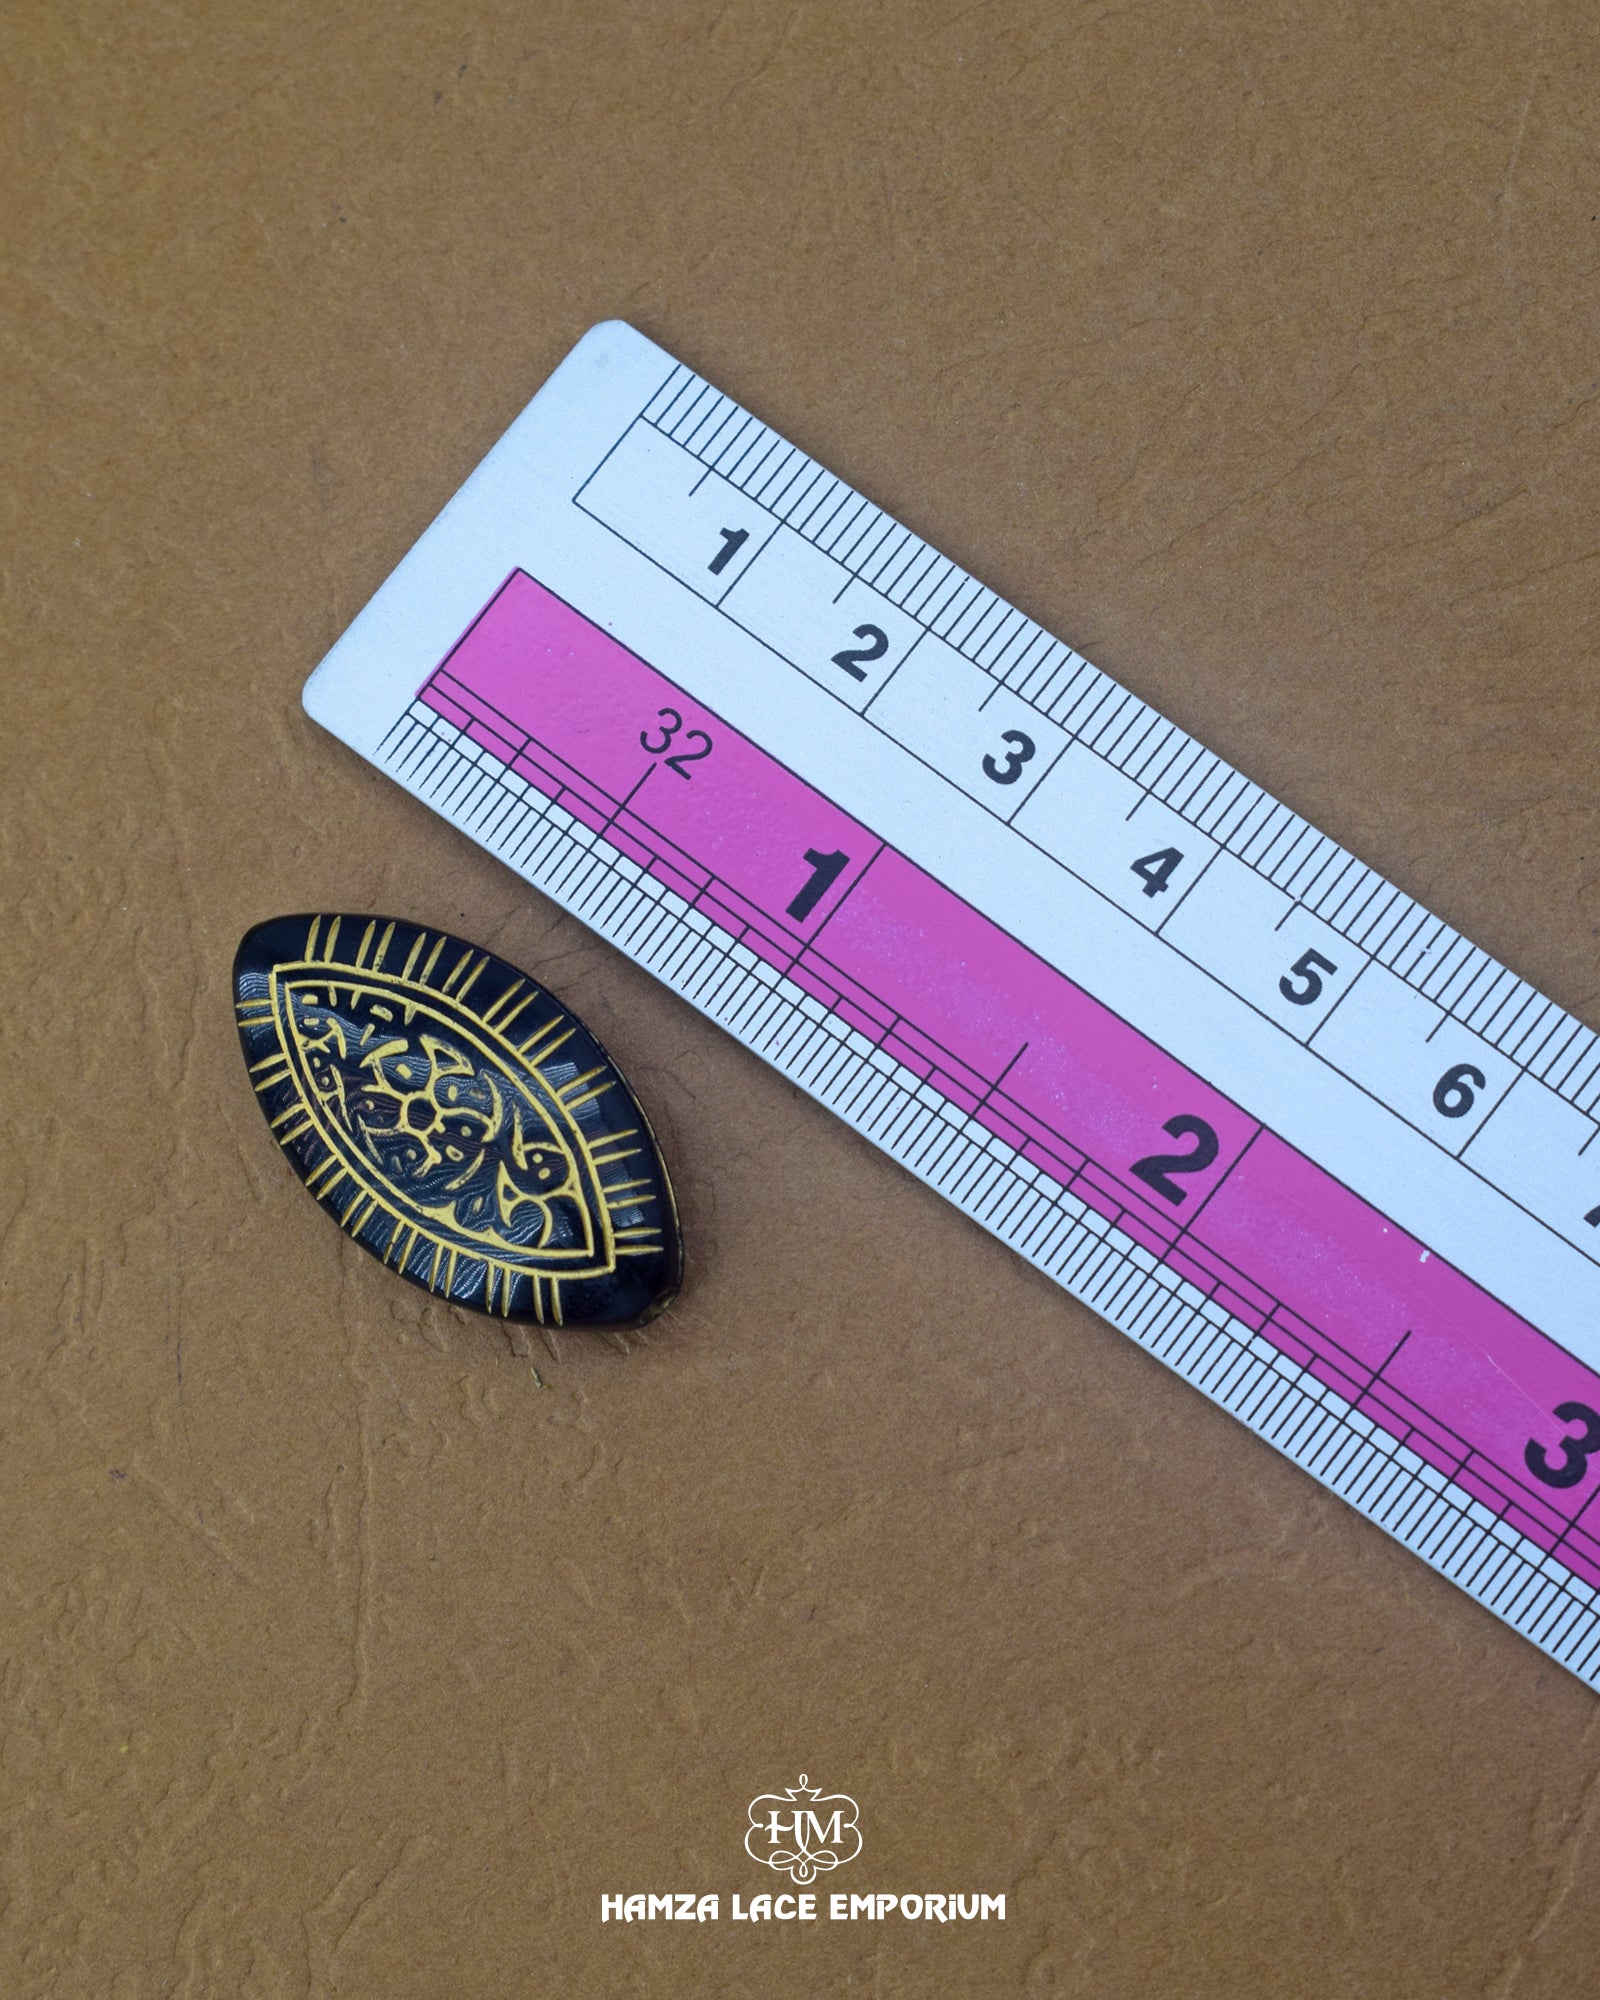 The size of the Beautifully designed 'Oval Shape Button MA329' is measured by using a ruler